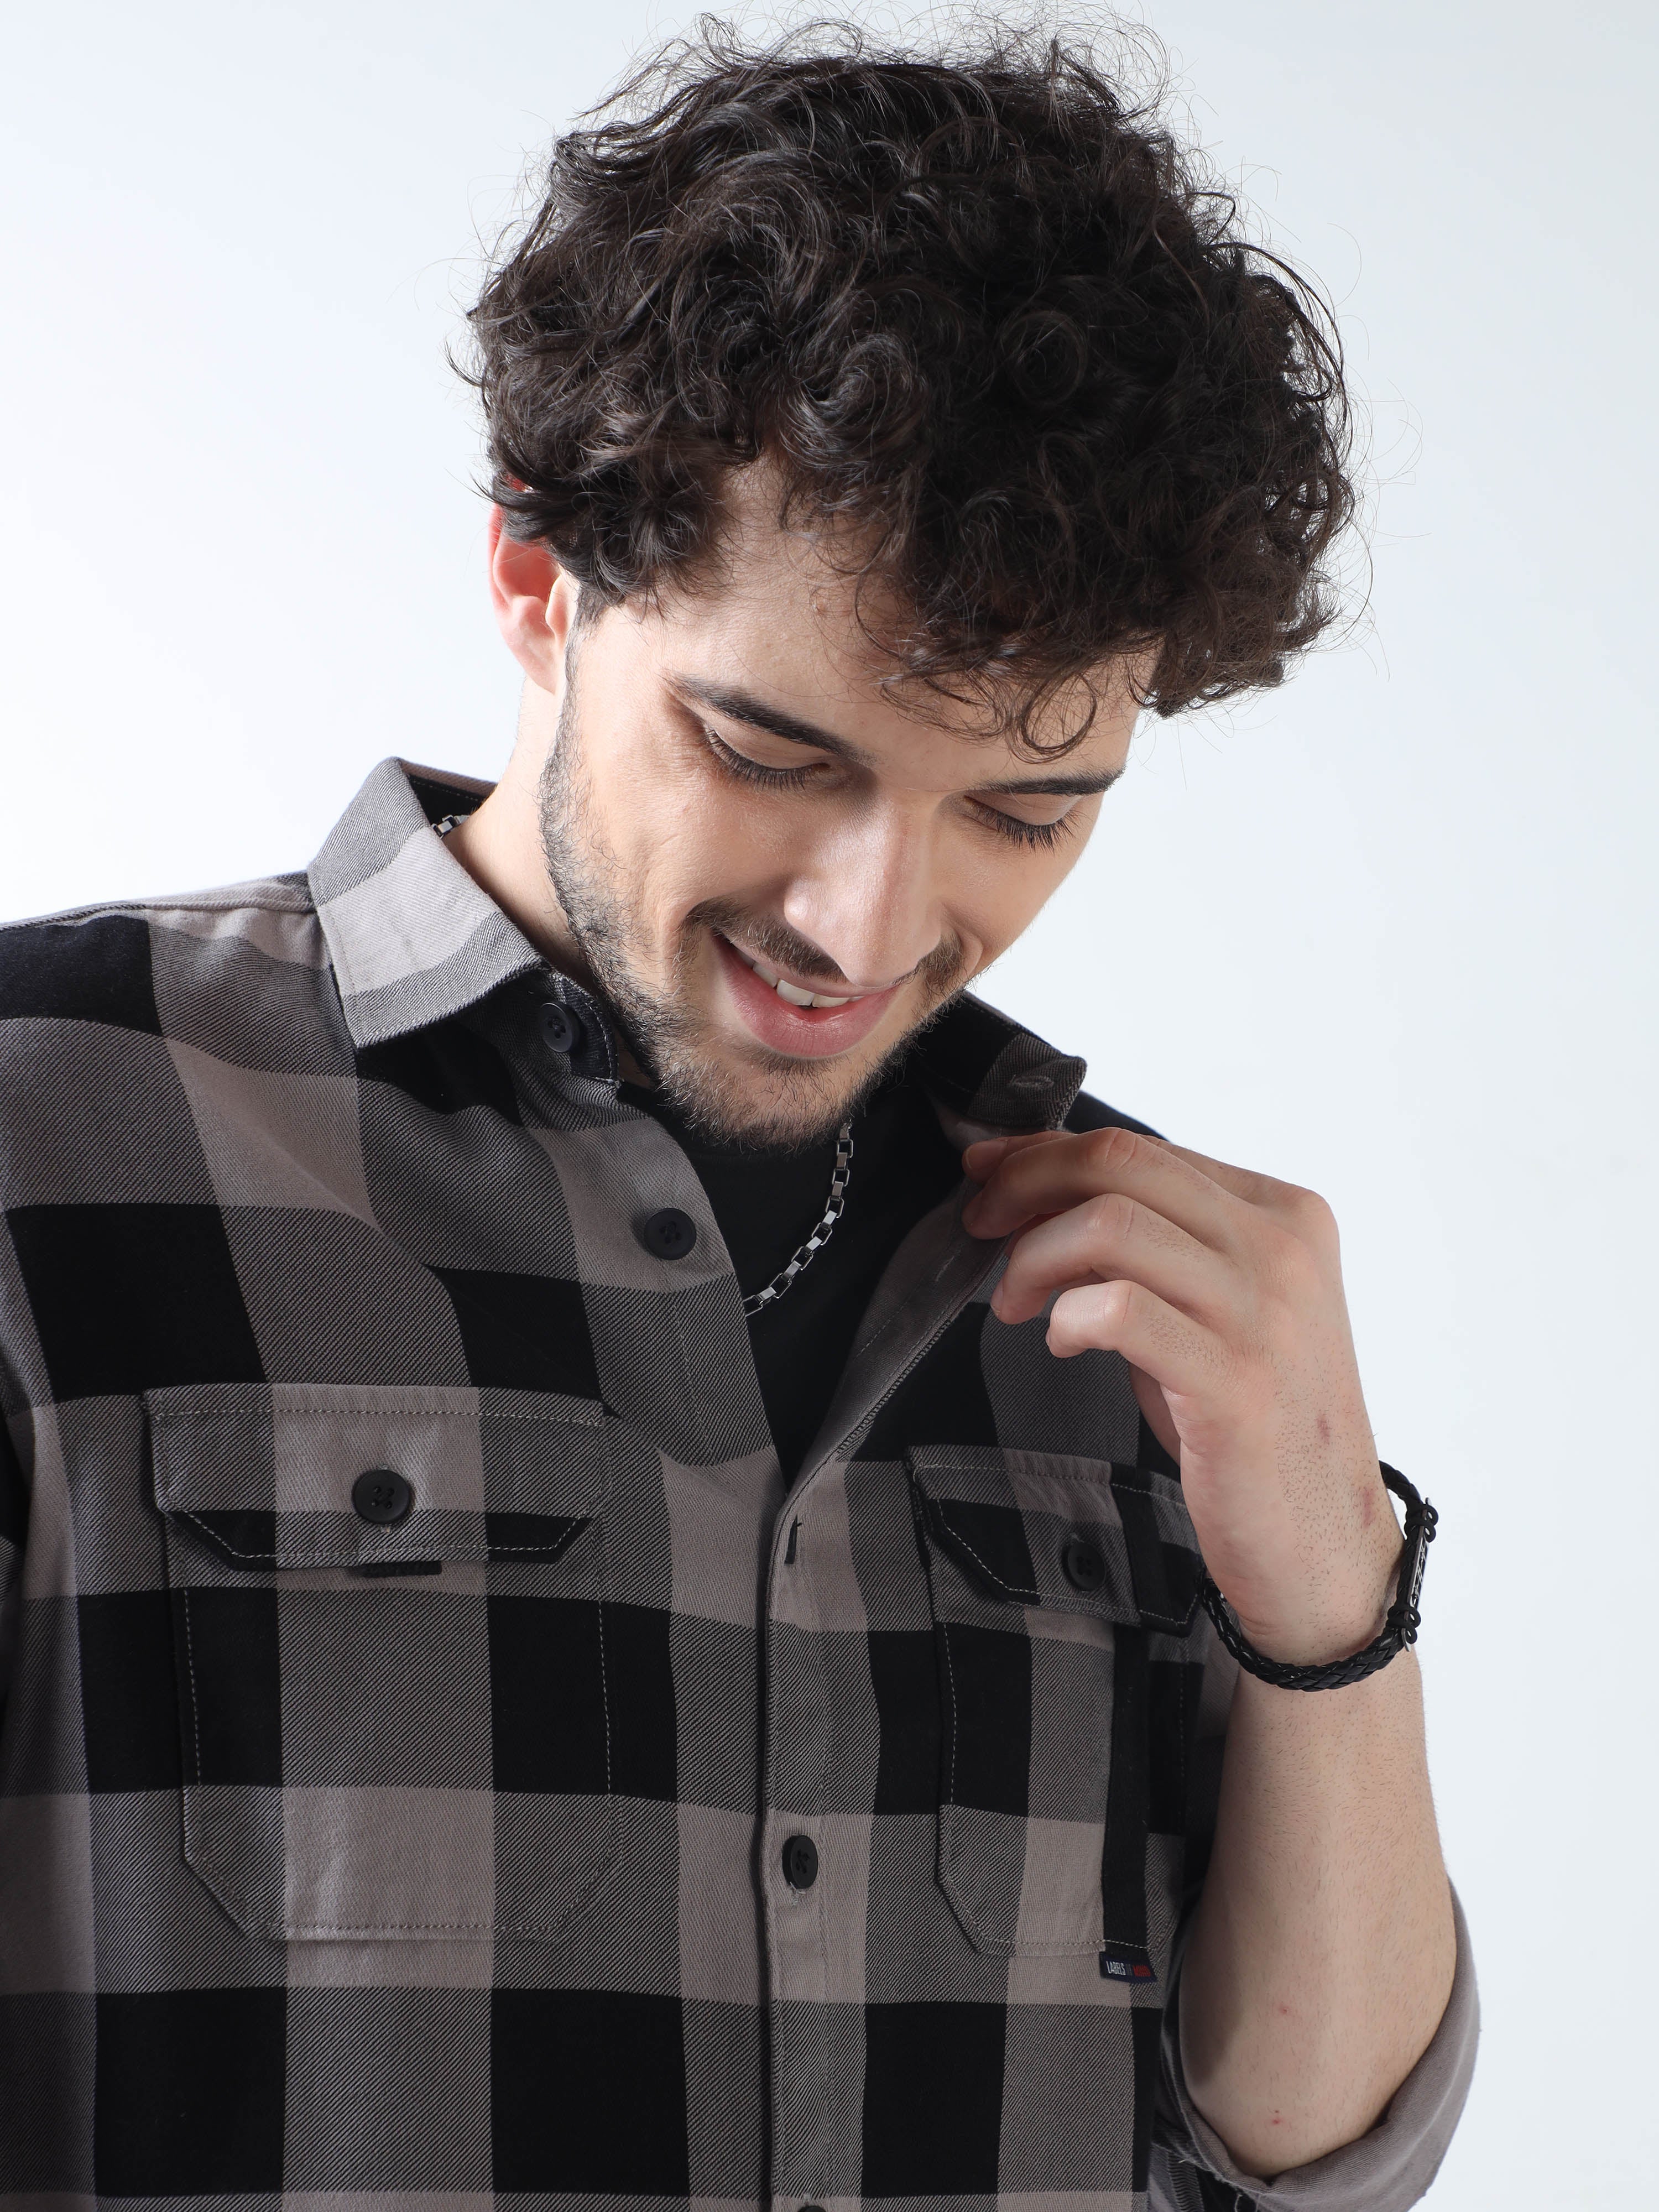 Buy Cool and Comfortable beige check shirt at Great priceRs. 1359.00